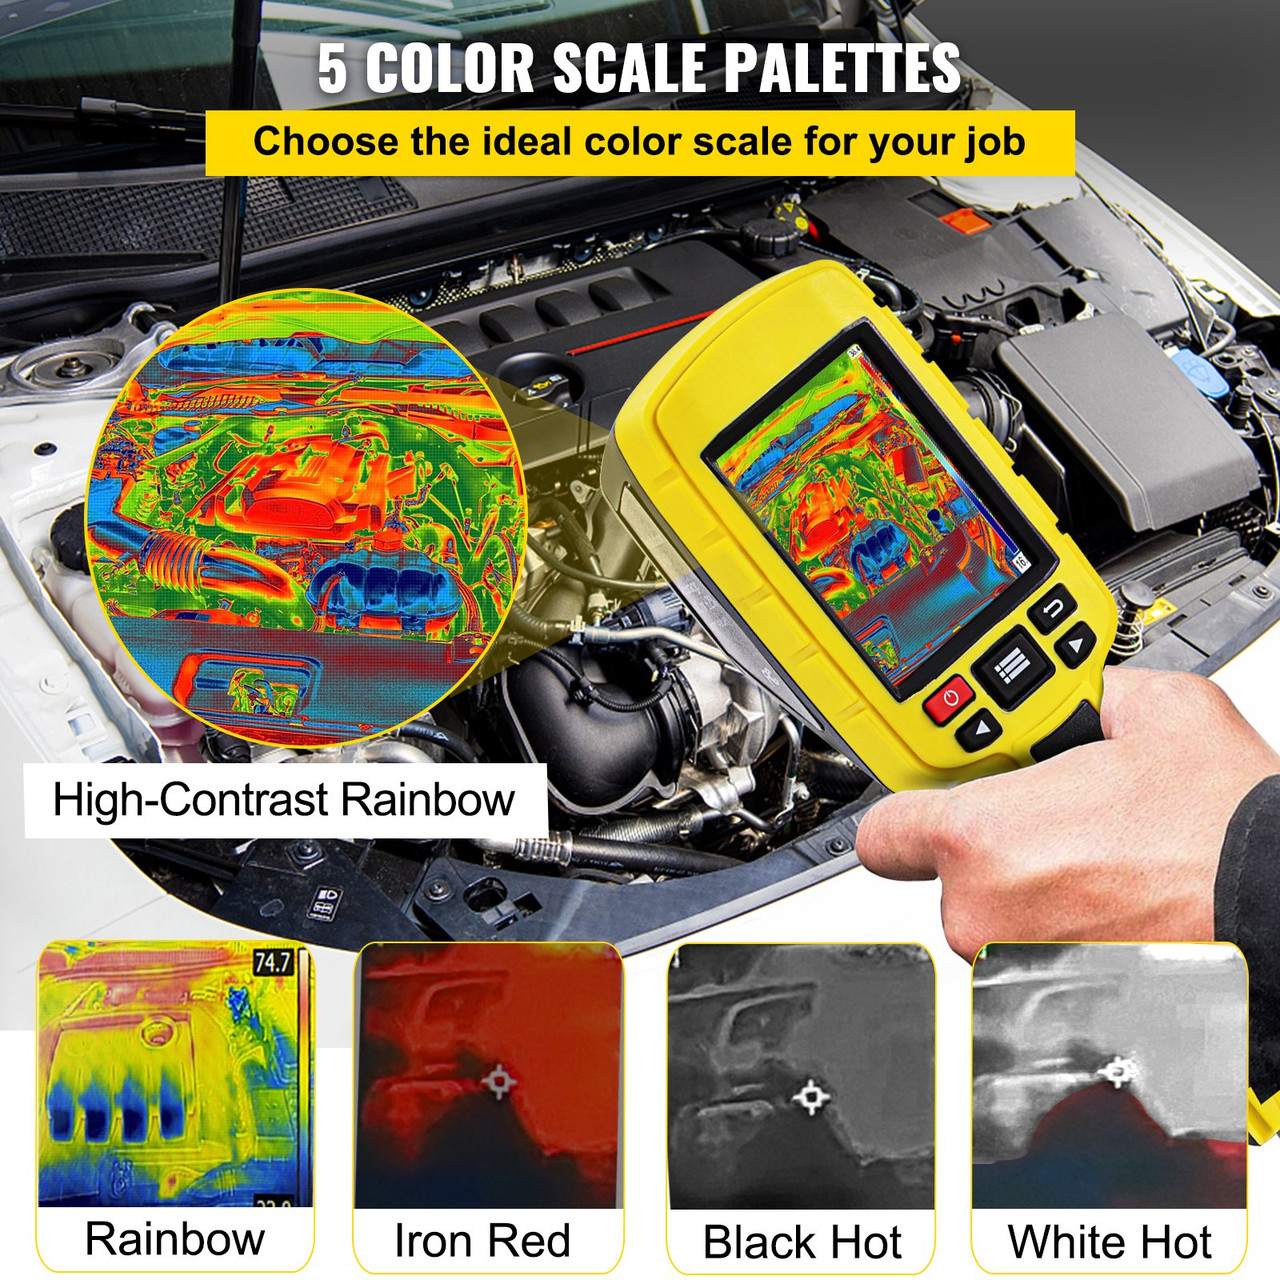 Infrared Thermal Imager Thermal Camera IR Resolution 3600 2.8" LCD Screen